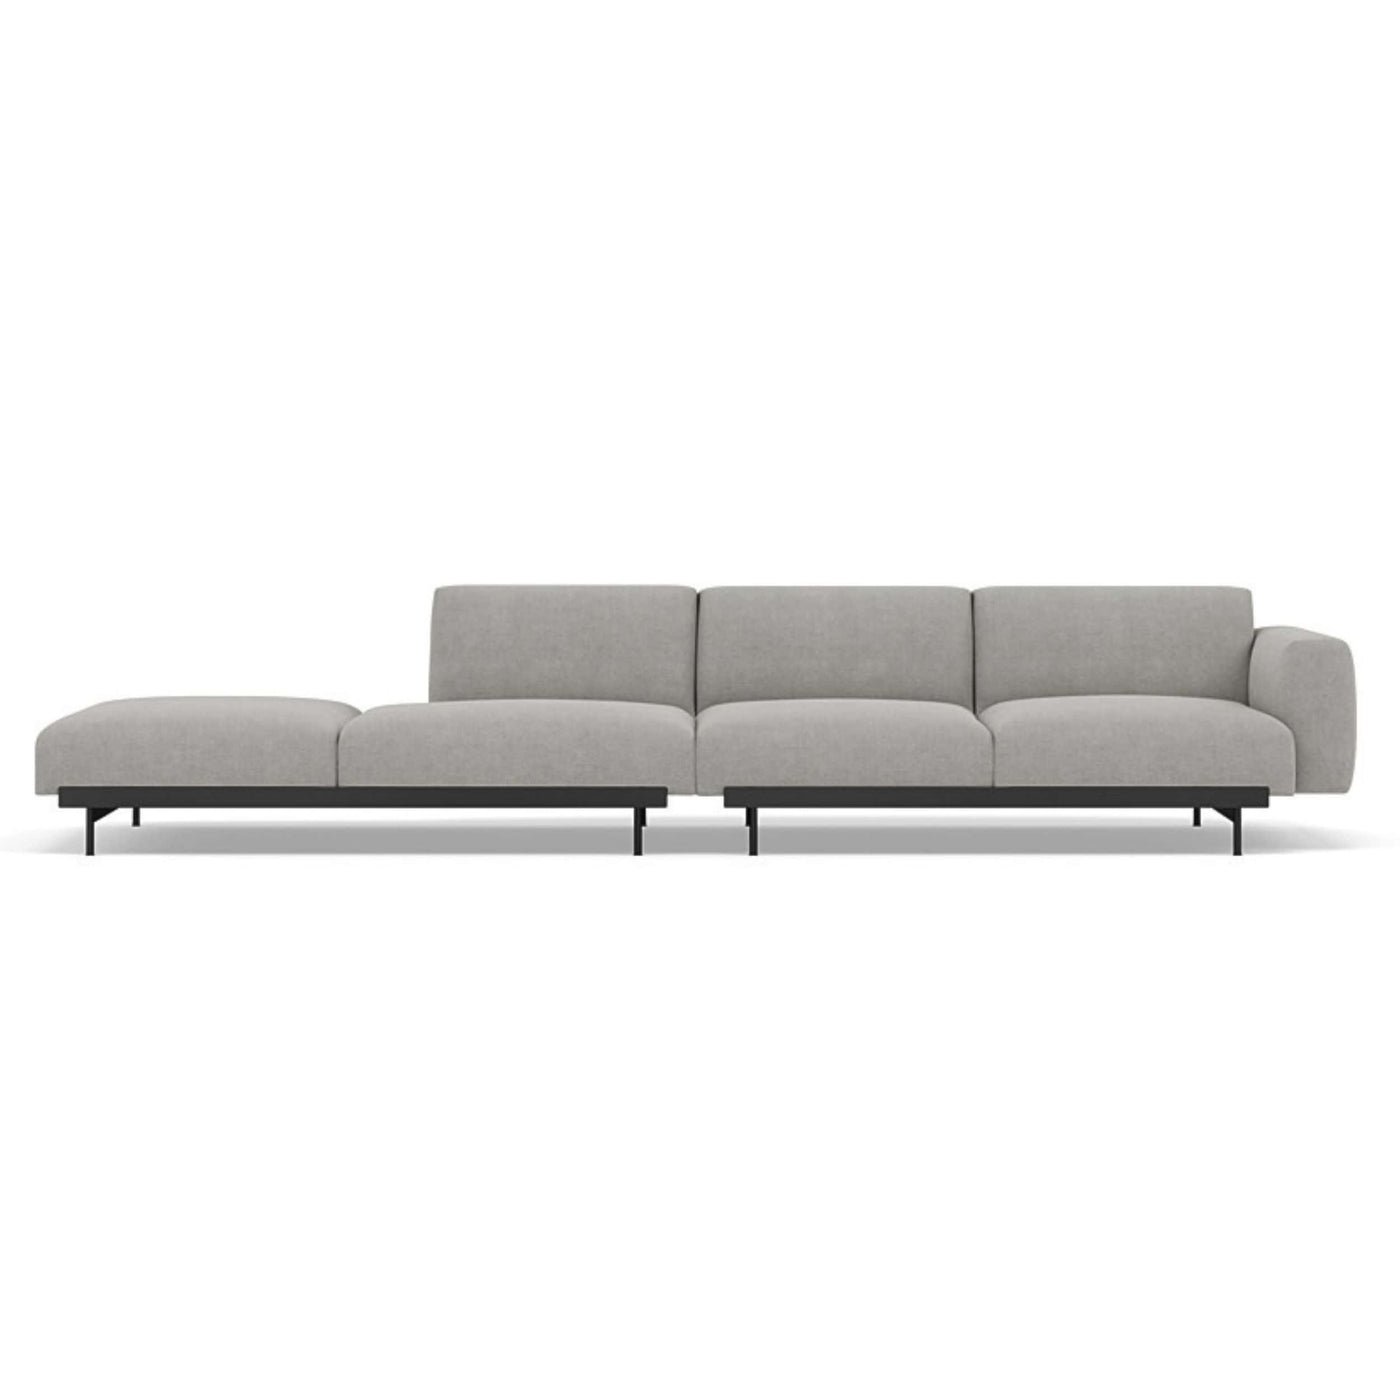 Muuto In Situ Modular 4 Seater Sofa configuration 3. Made to order from someday designs. #colour_fiord-151